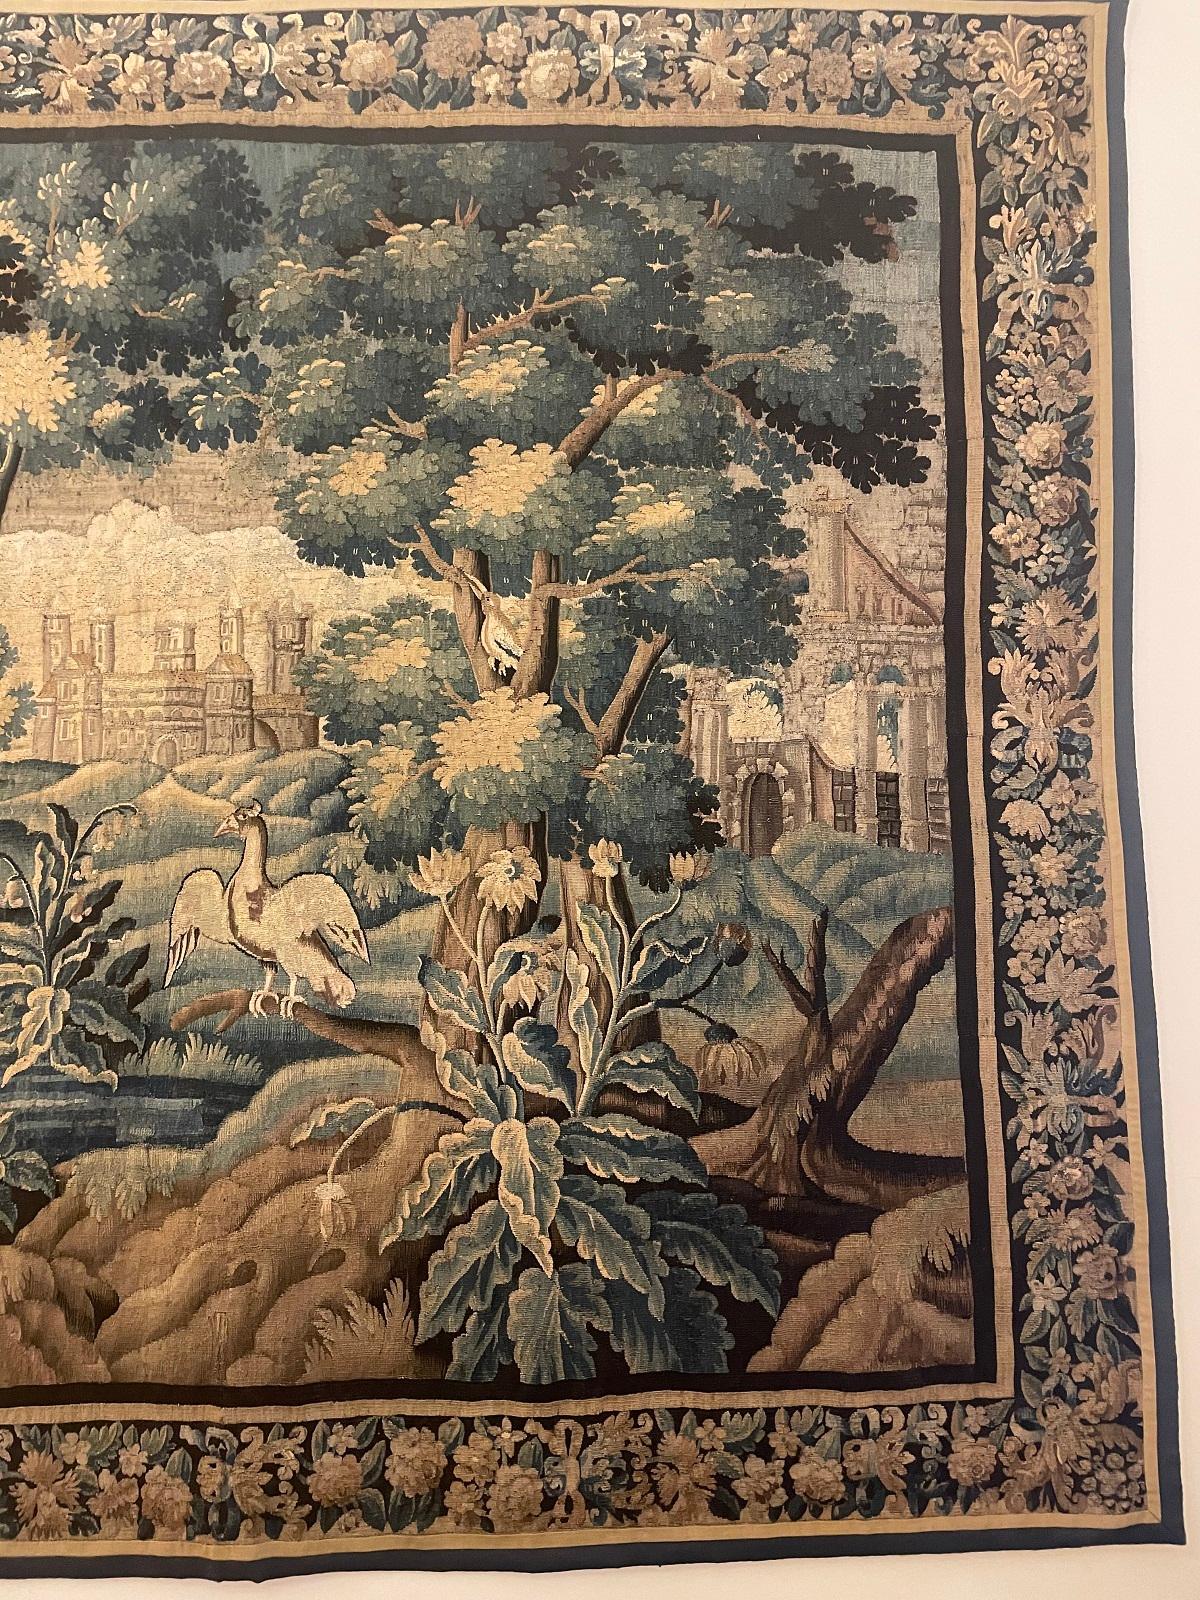 A fine and very impressive Aubusson tapestry from the end of the 17th century representing a very beautiful country landscape with a castles, old runes of a castle, a swan and a hawk 

Tapestry in very good state of conservation which kept very